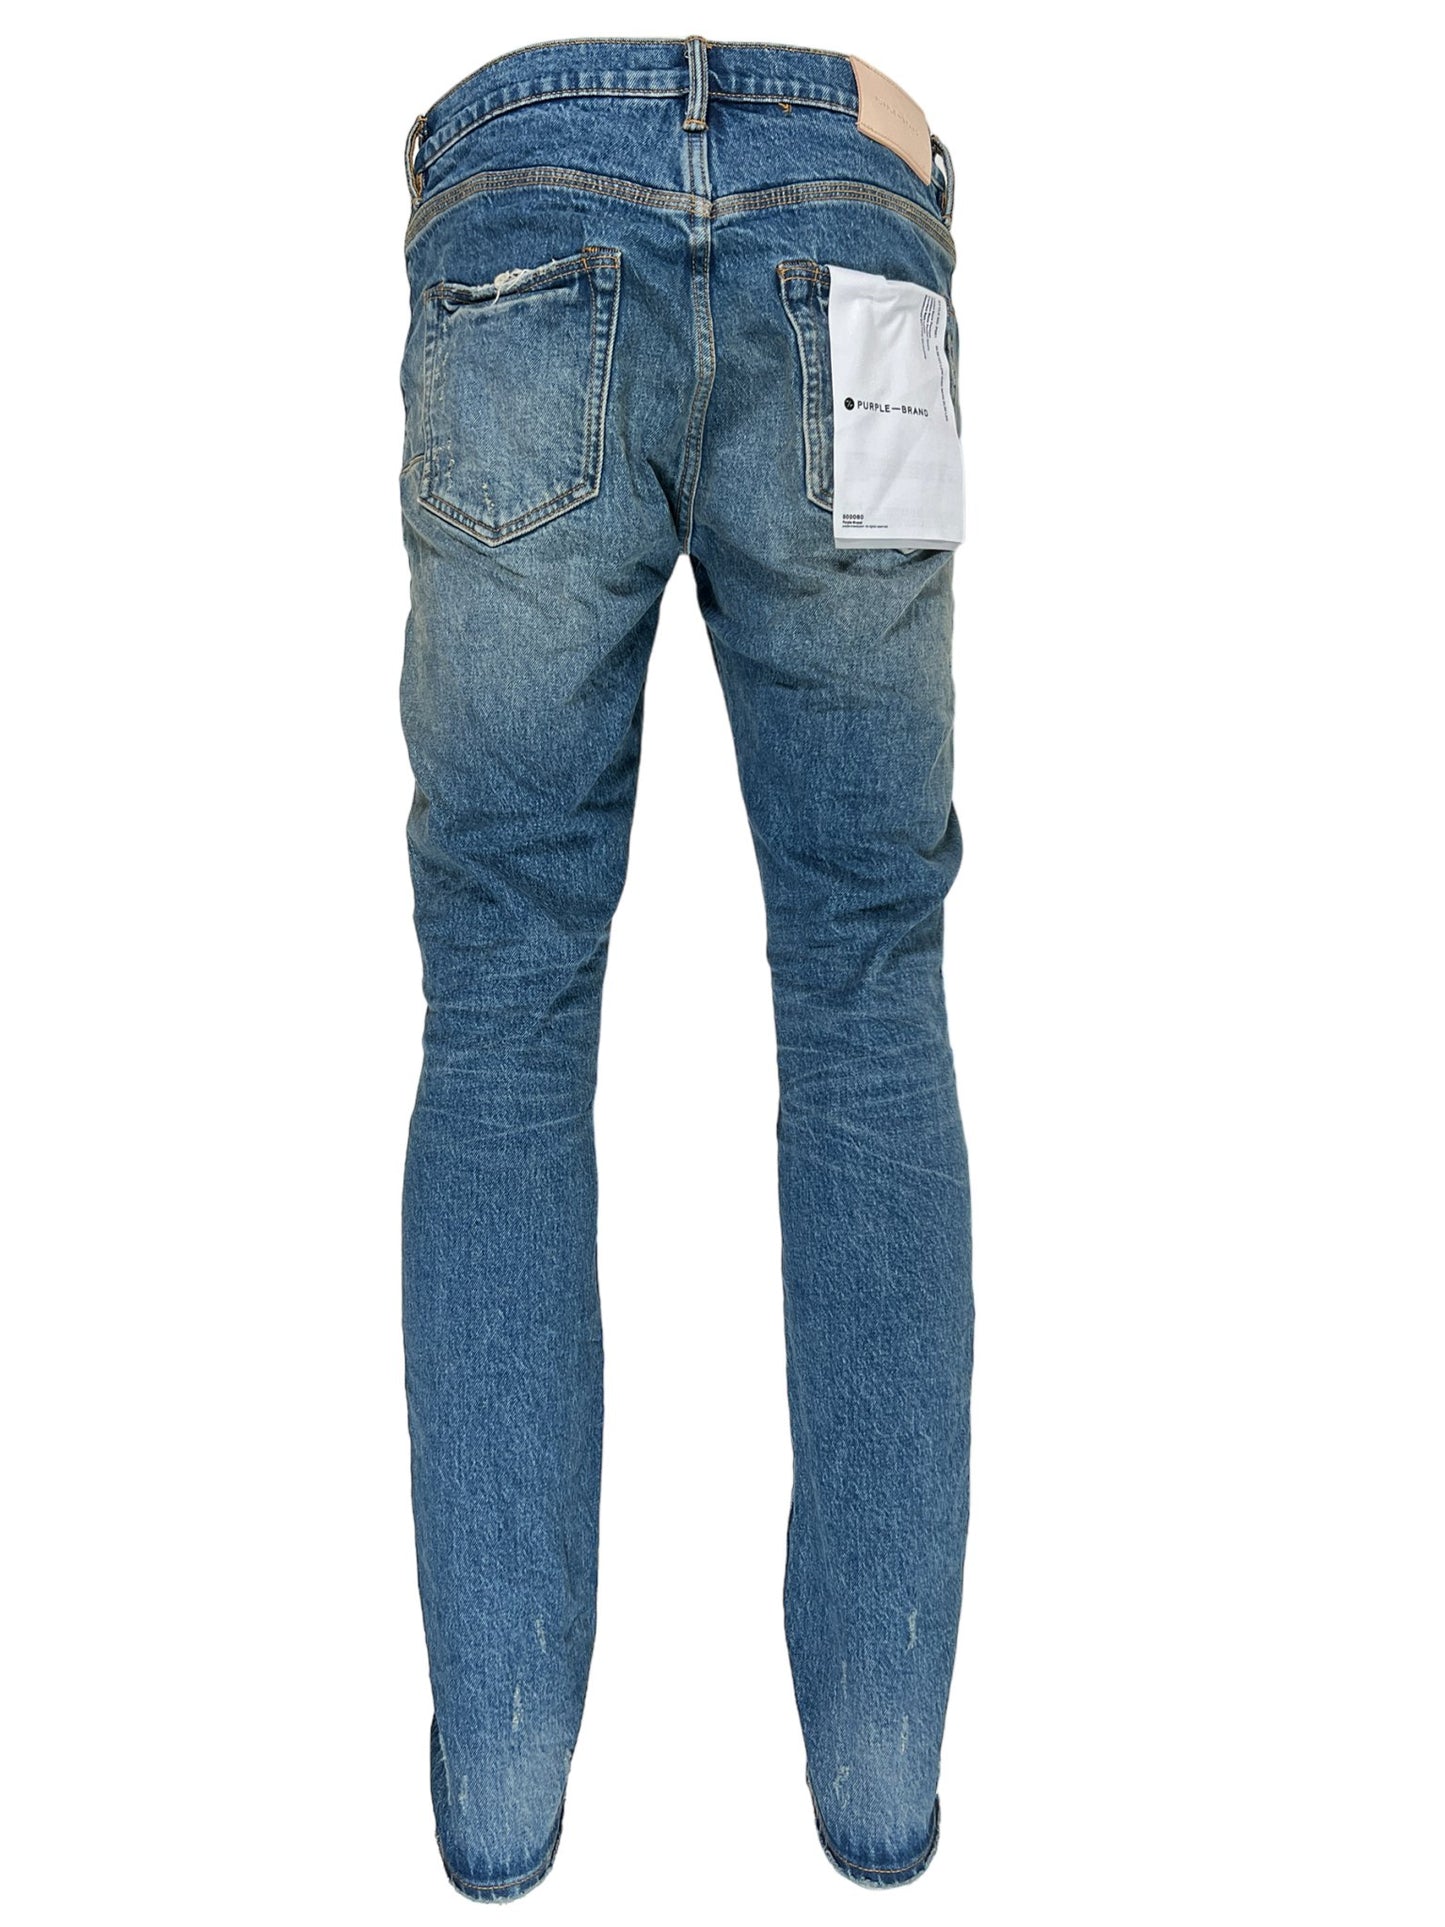 A pair of PURPLE BRAND P001-THMI THRASHED MID INDIGO premium stretch denim jeans with a pocket on the back.